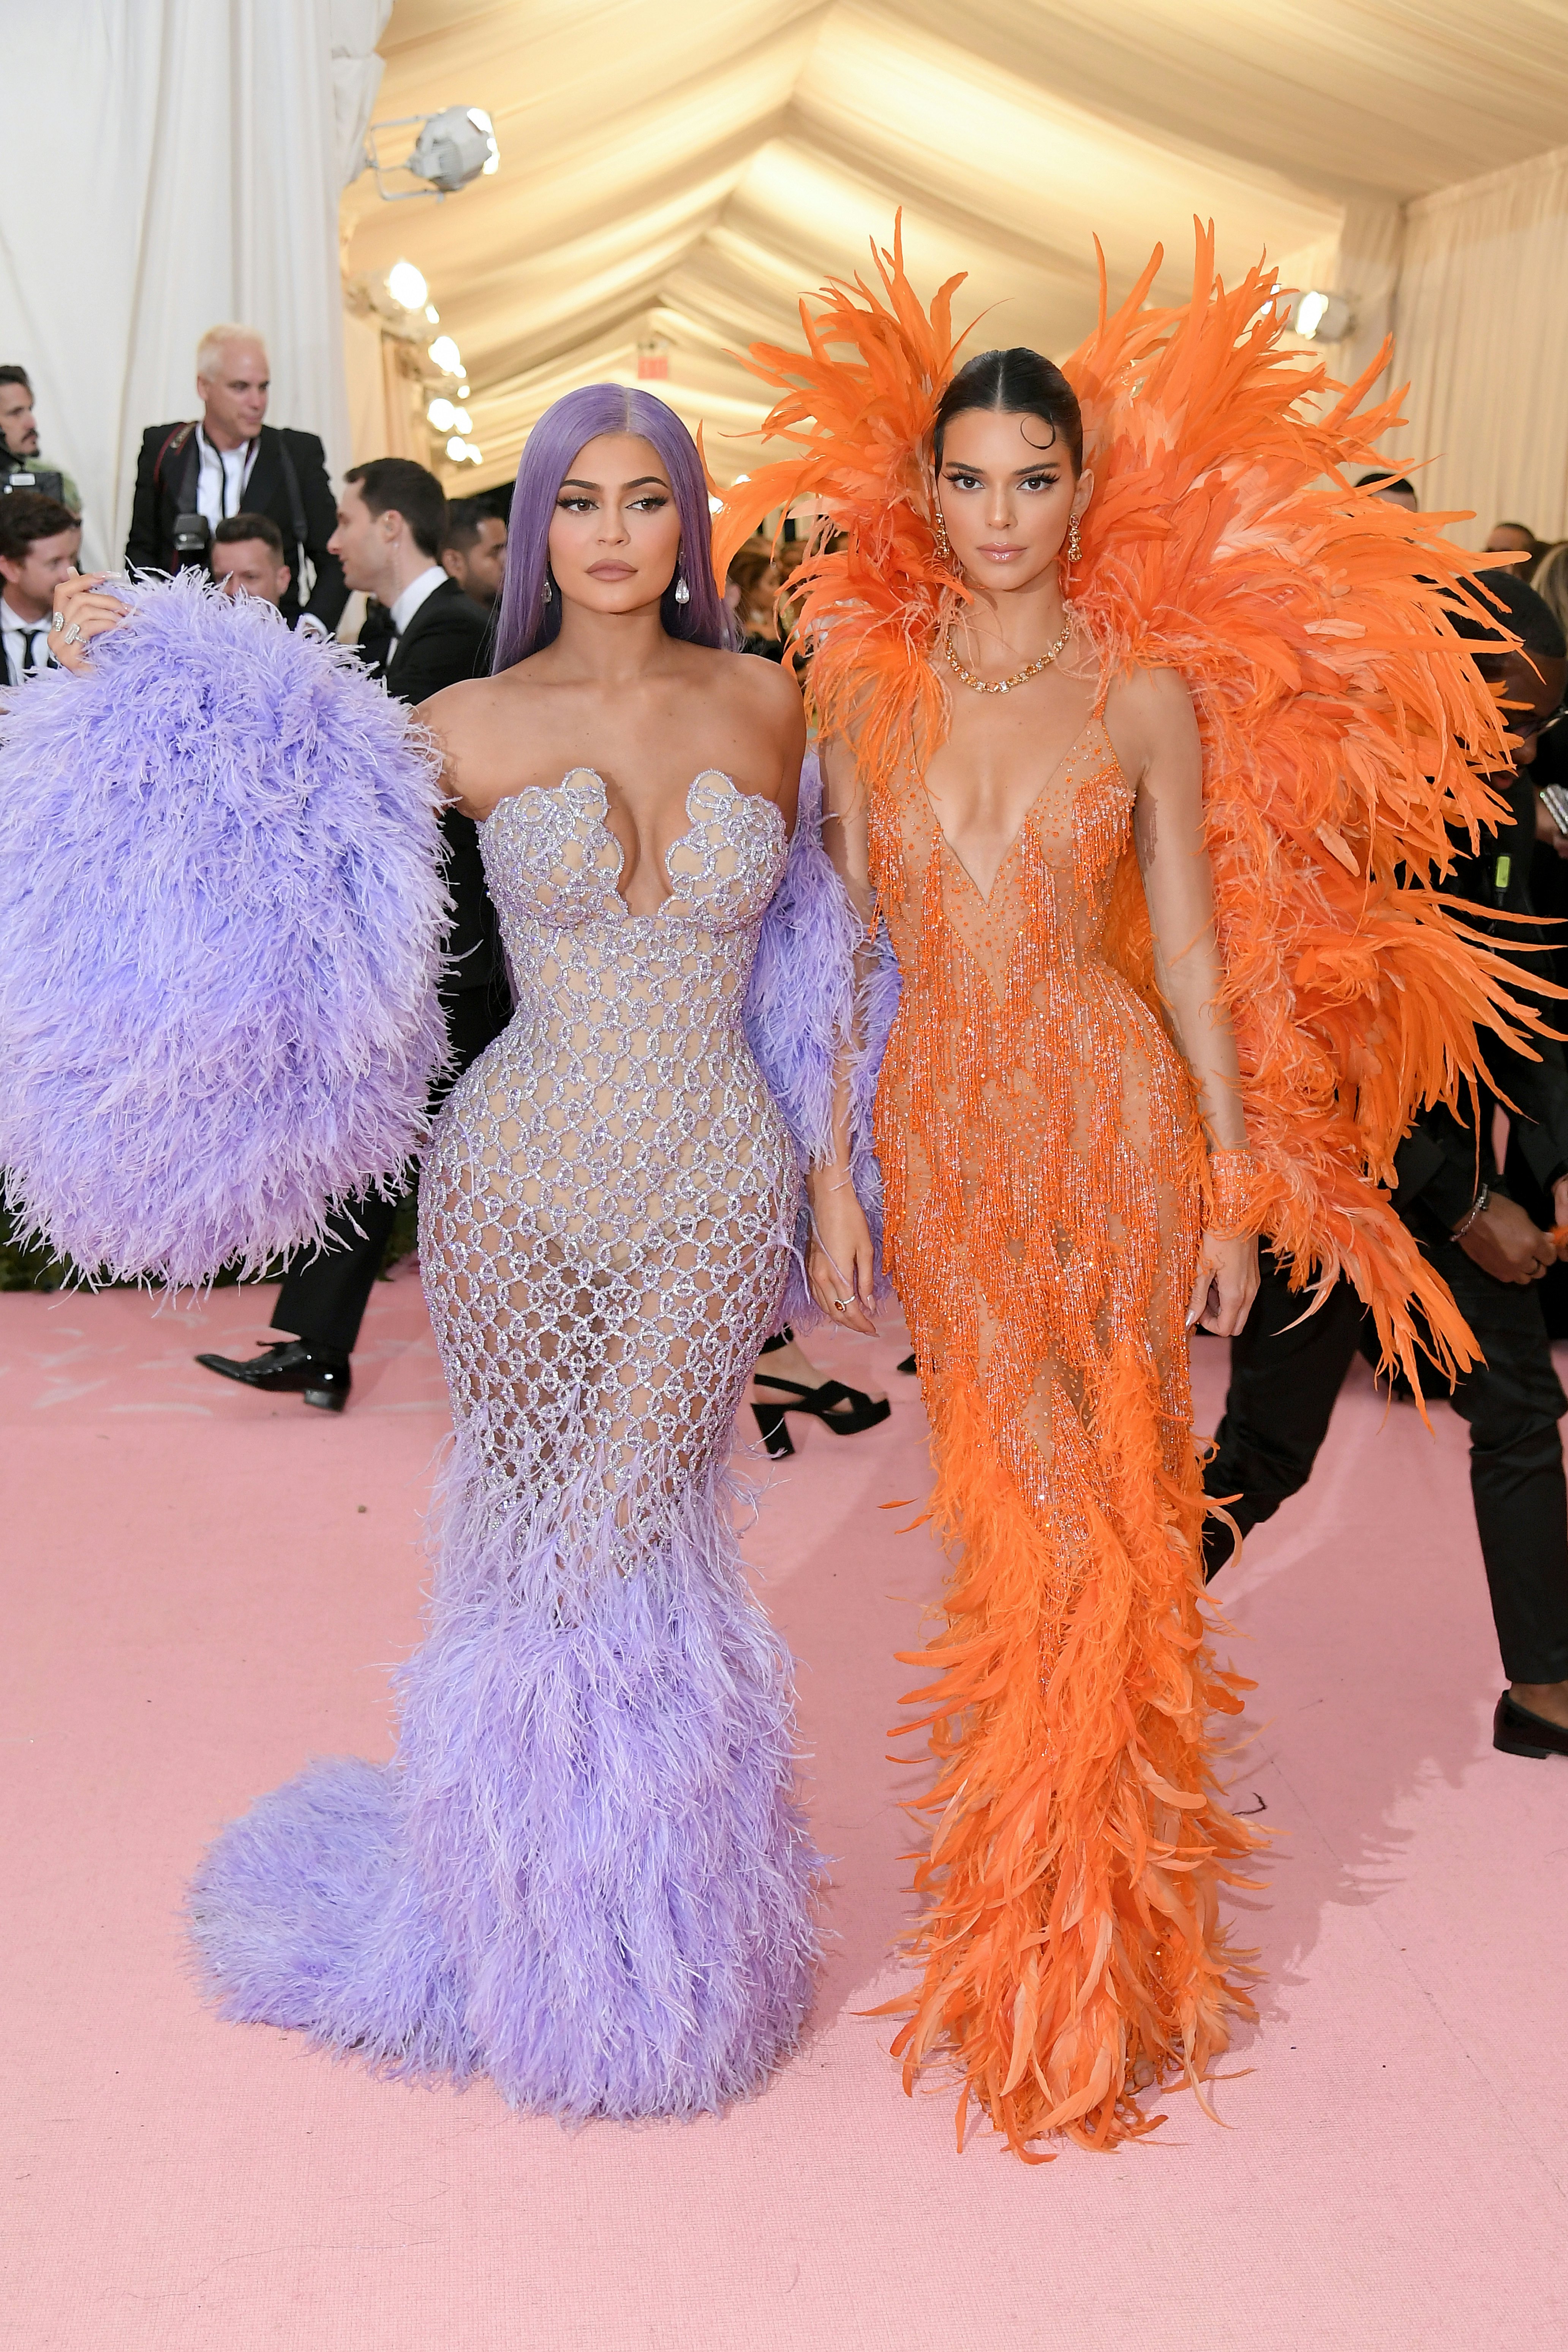 Kendall Jenners 2019 Met Gala Outfit Was Highlighter Orange